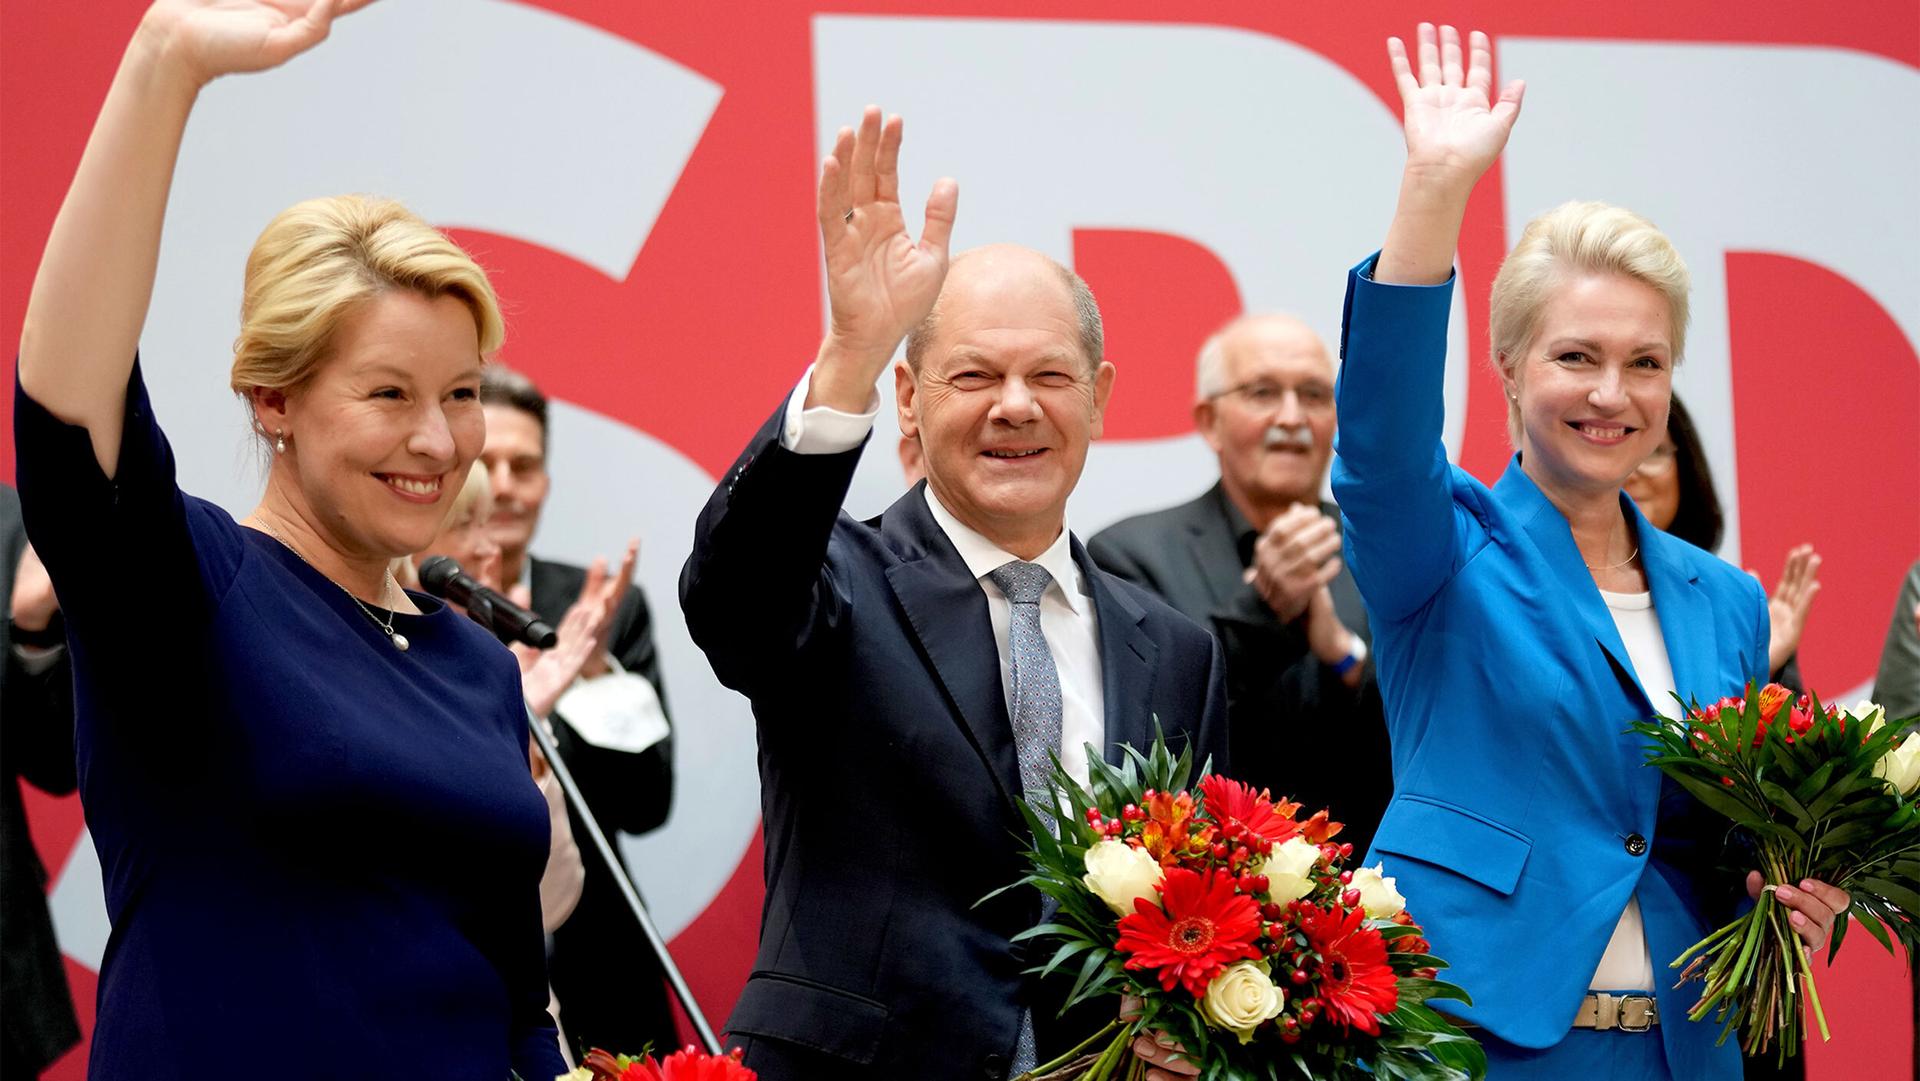 Olaf Scholz is shown wearing a dark suit and standing inbetween two other top German politicians with all three waving their right hands.